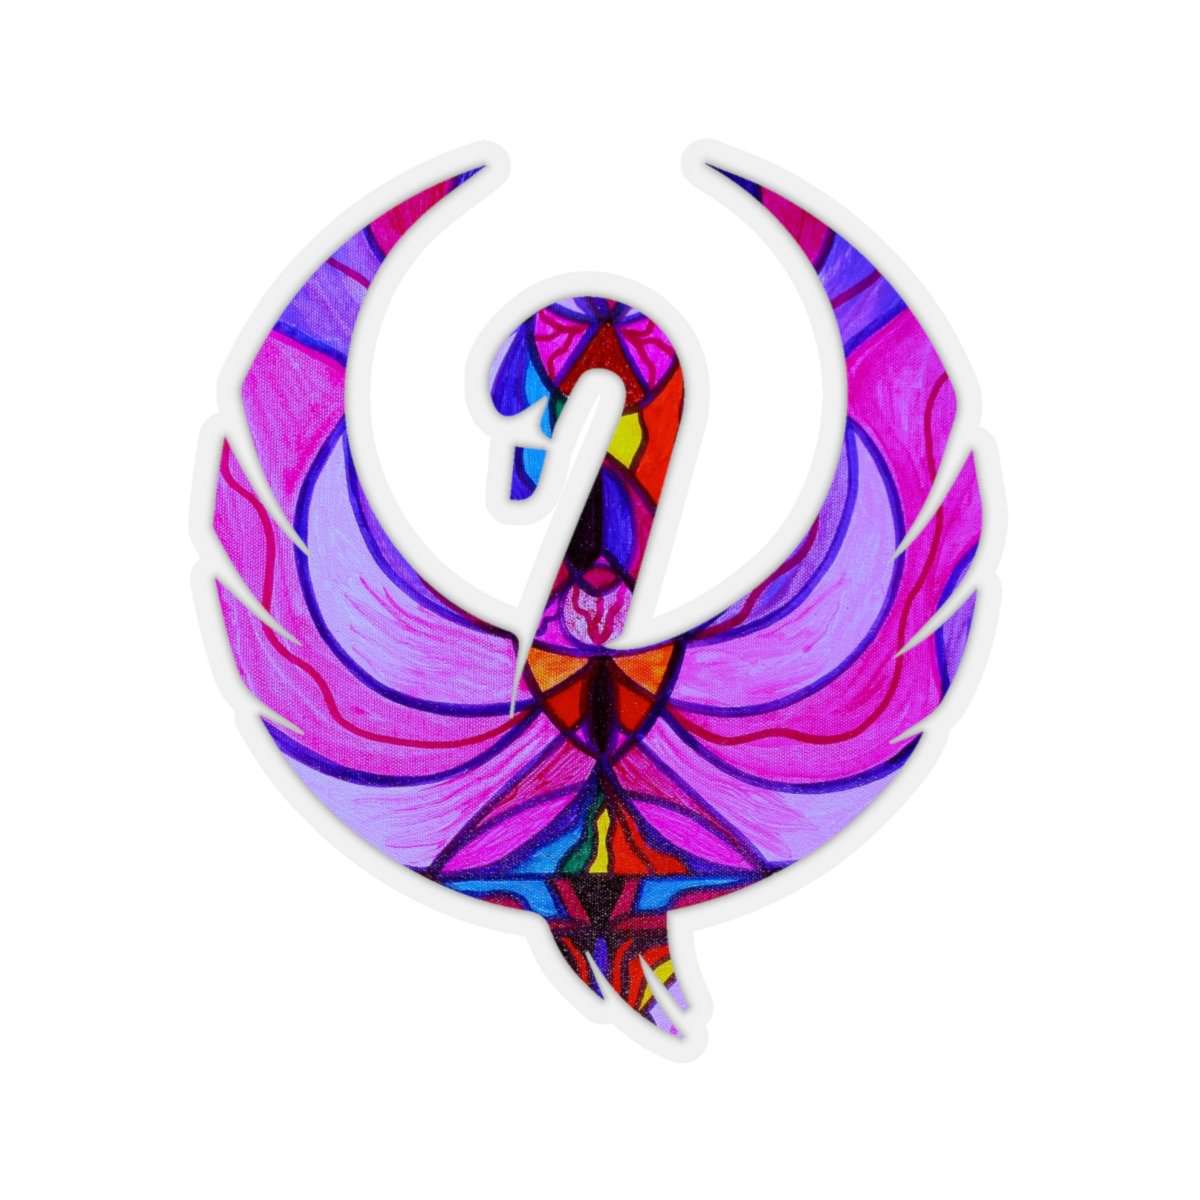 make-your-dreams-come-true-to-wear-divine-feminine-activation-swan-stickers-supply_8.jpg